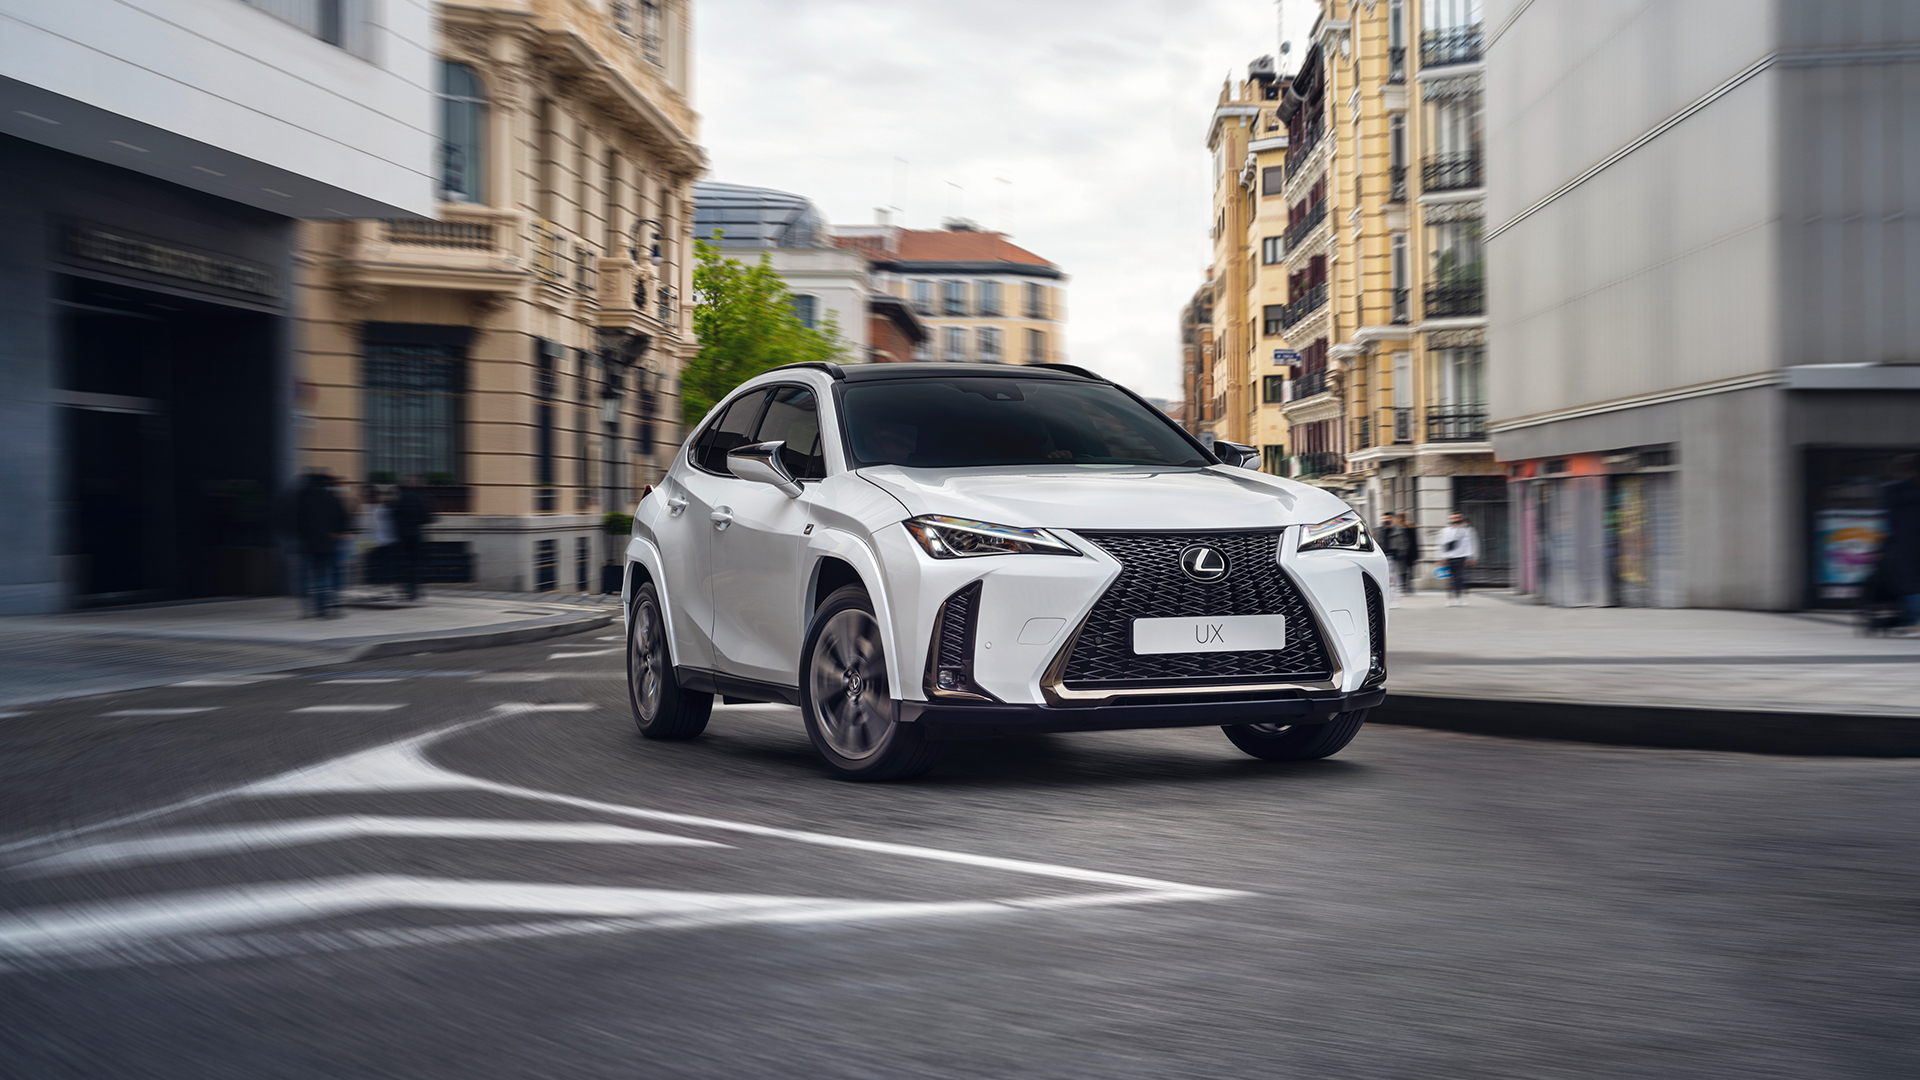 A Lexus UX driving round a corner in a town